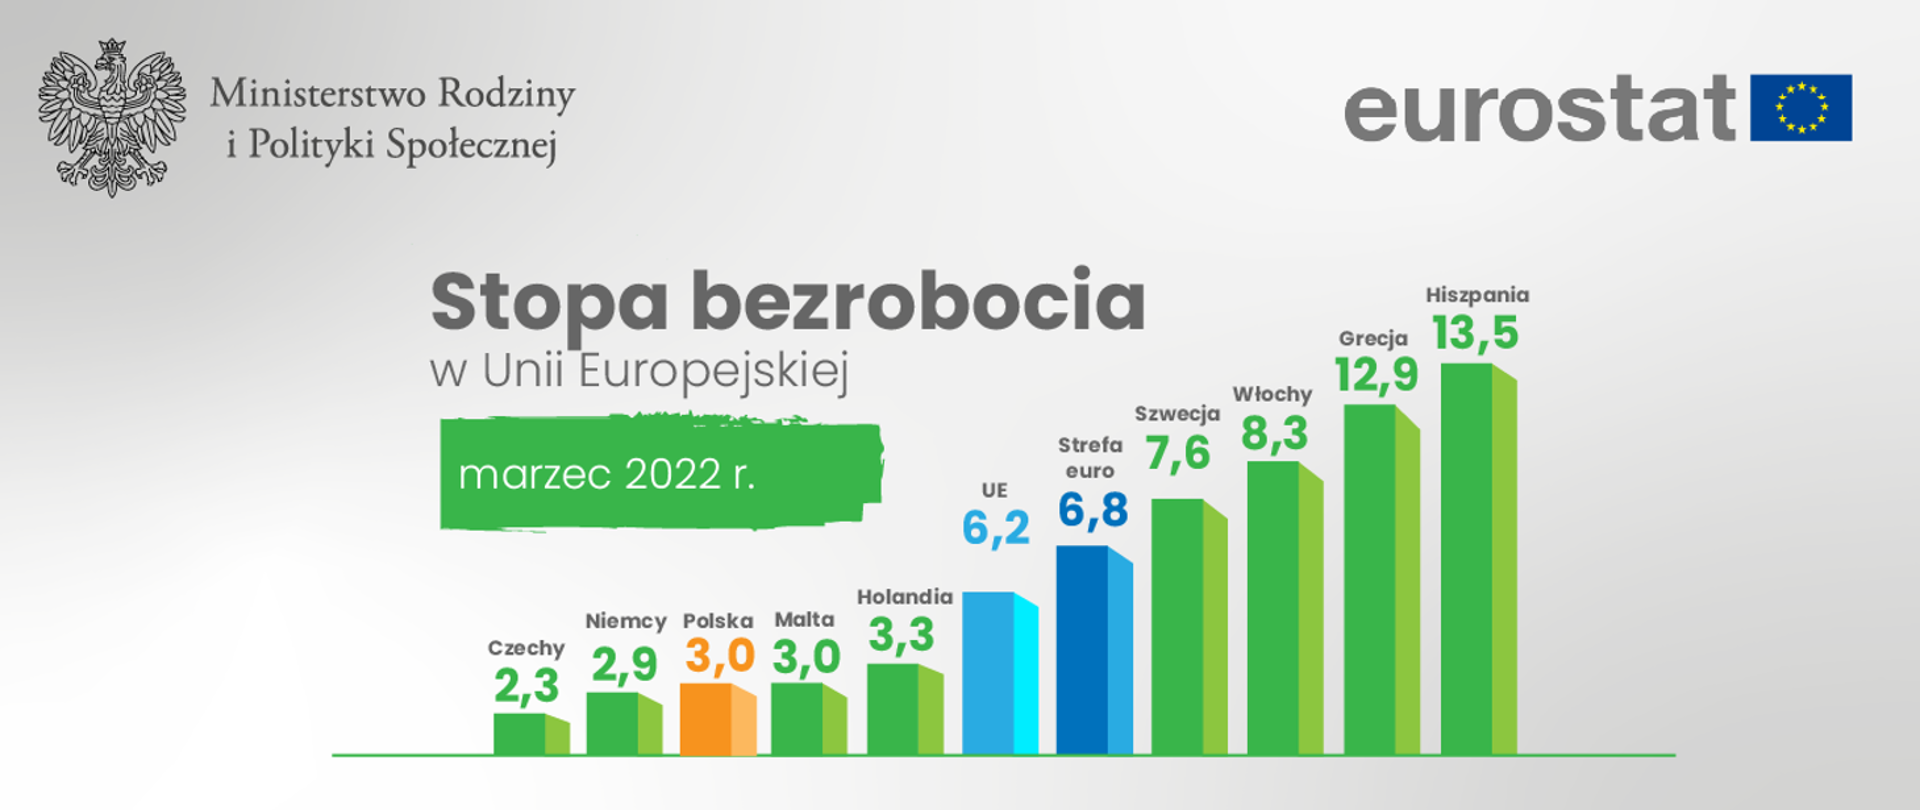 Eurostat: Unemployment rate at 3% in Poland in March